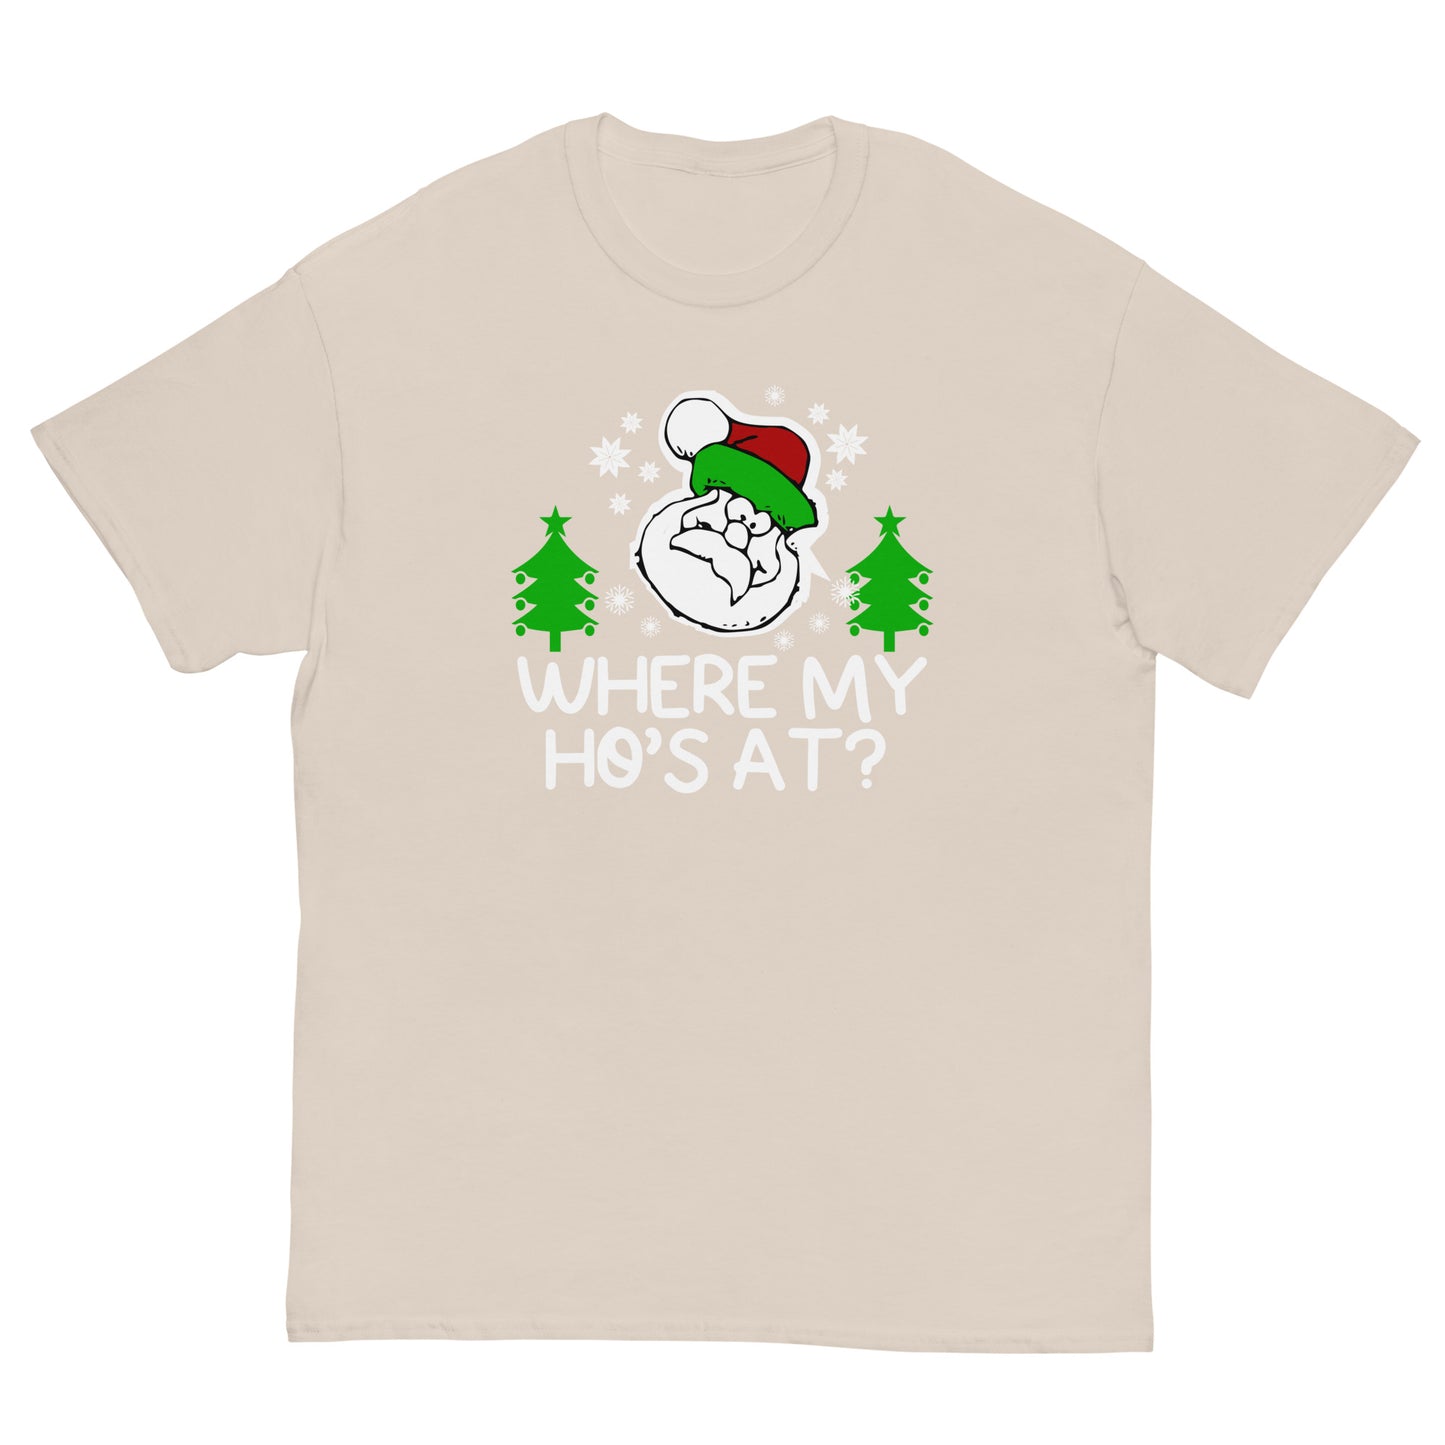 "Where My Ho's At?" Funny Adult Shirt - Weave Got Gifts - Unique Gifts You Won’t Find Anywhere Else!